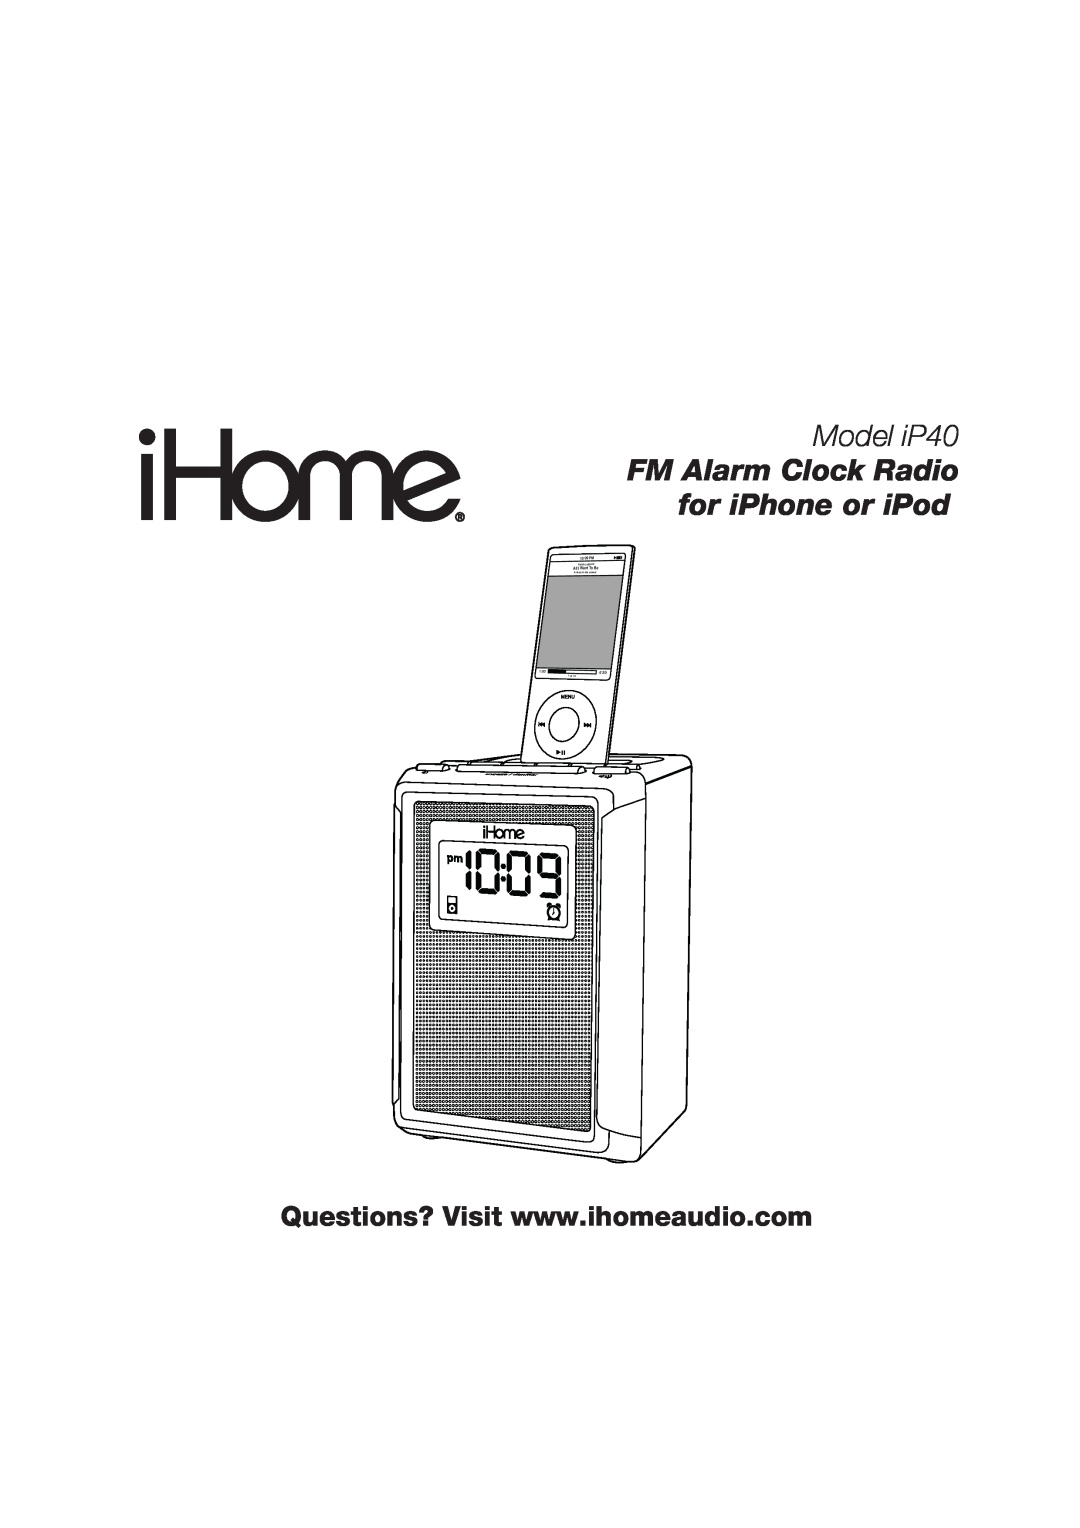 iHome manual Model iP40, FM Alarm Clock Radio for iPhone or iPod, 1009 PM, All I Want To Be, Keith LuBrant, 103 1 of 